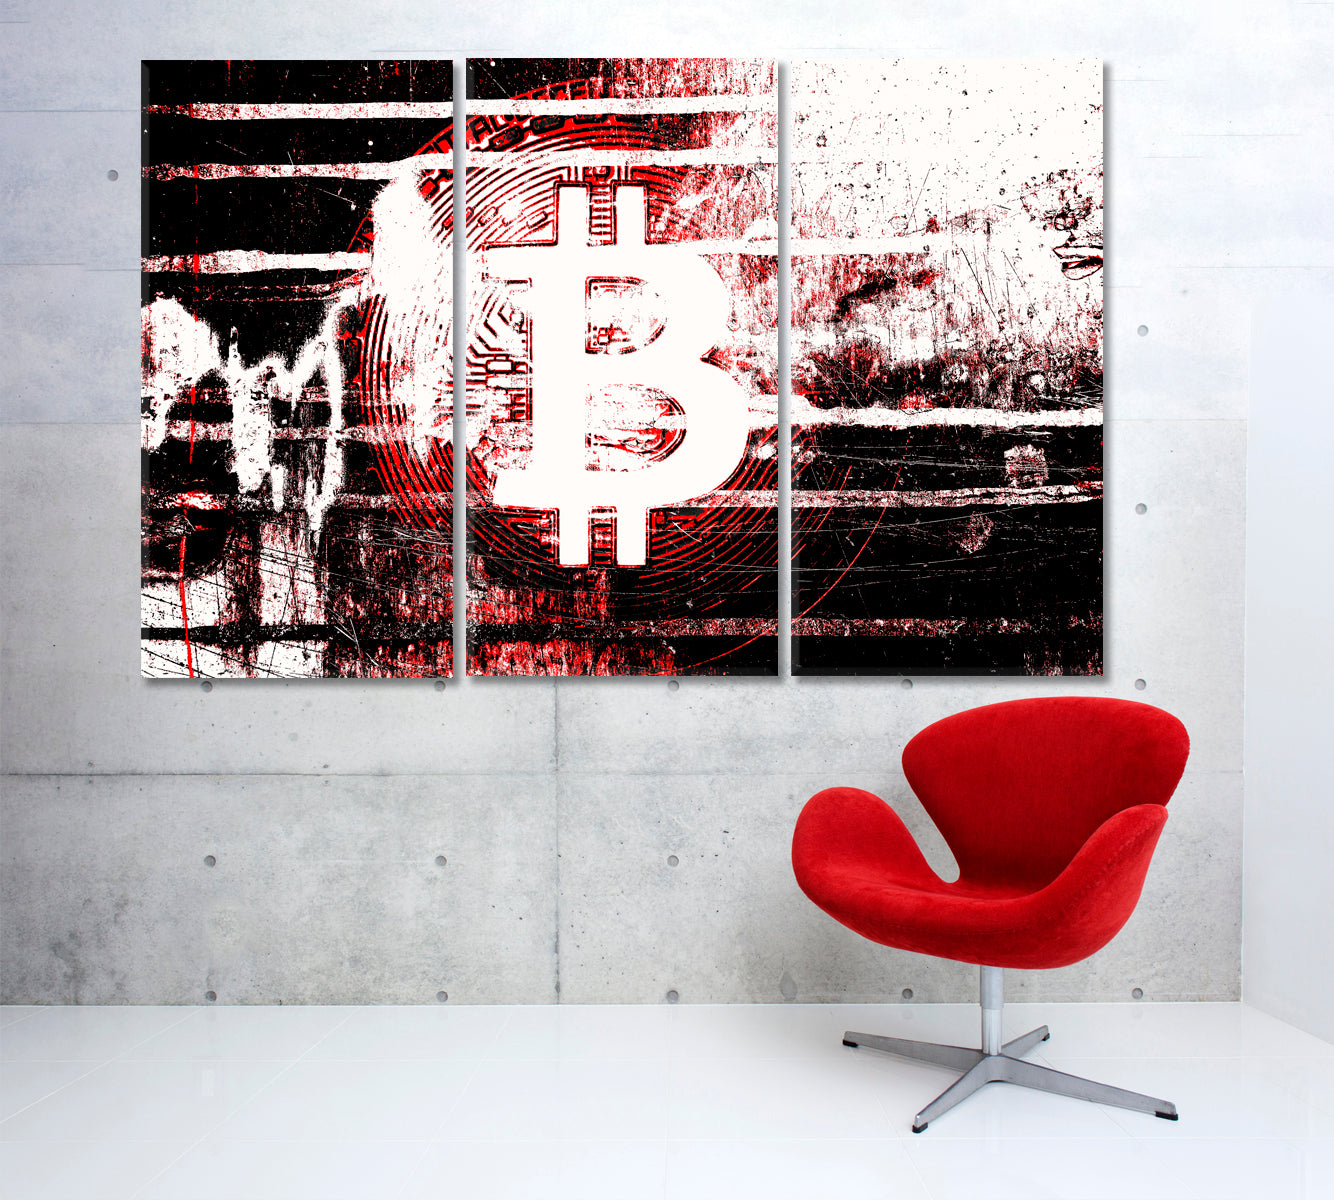 Bitcoin Cryptocurrency BTC Bit Coin Abstract Grunge Office Poster Business Concept Wall Art Artesty 3 panels 36" x 24" 